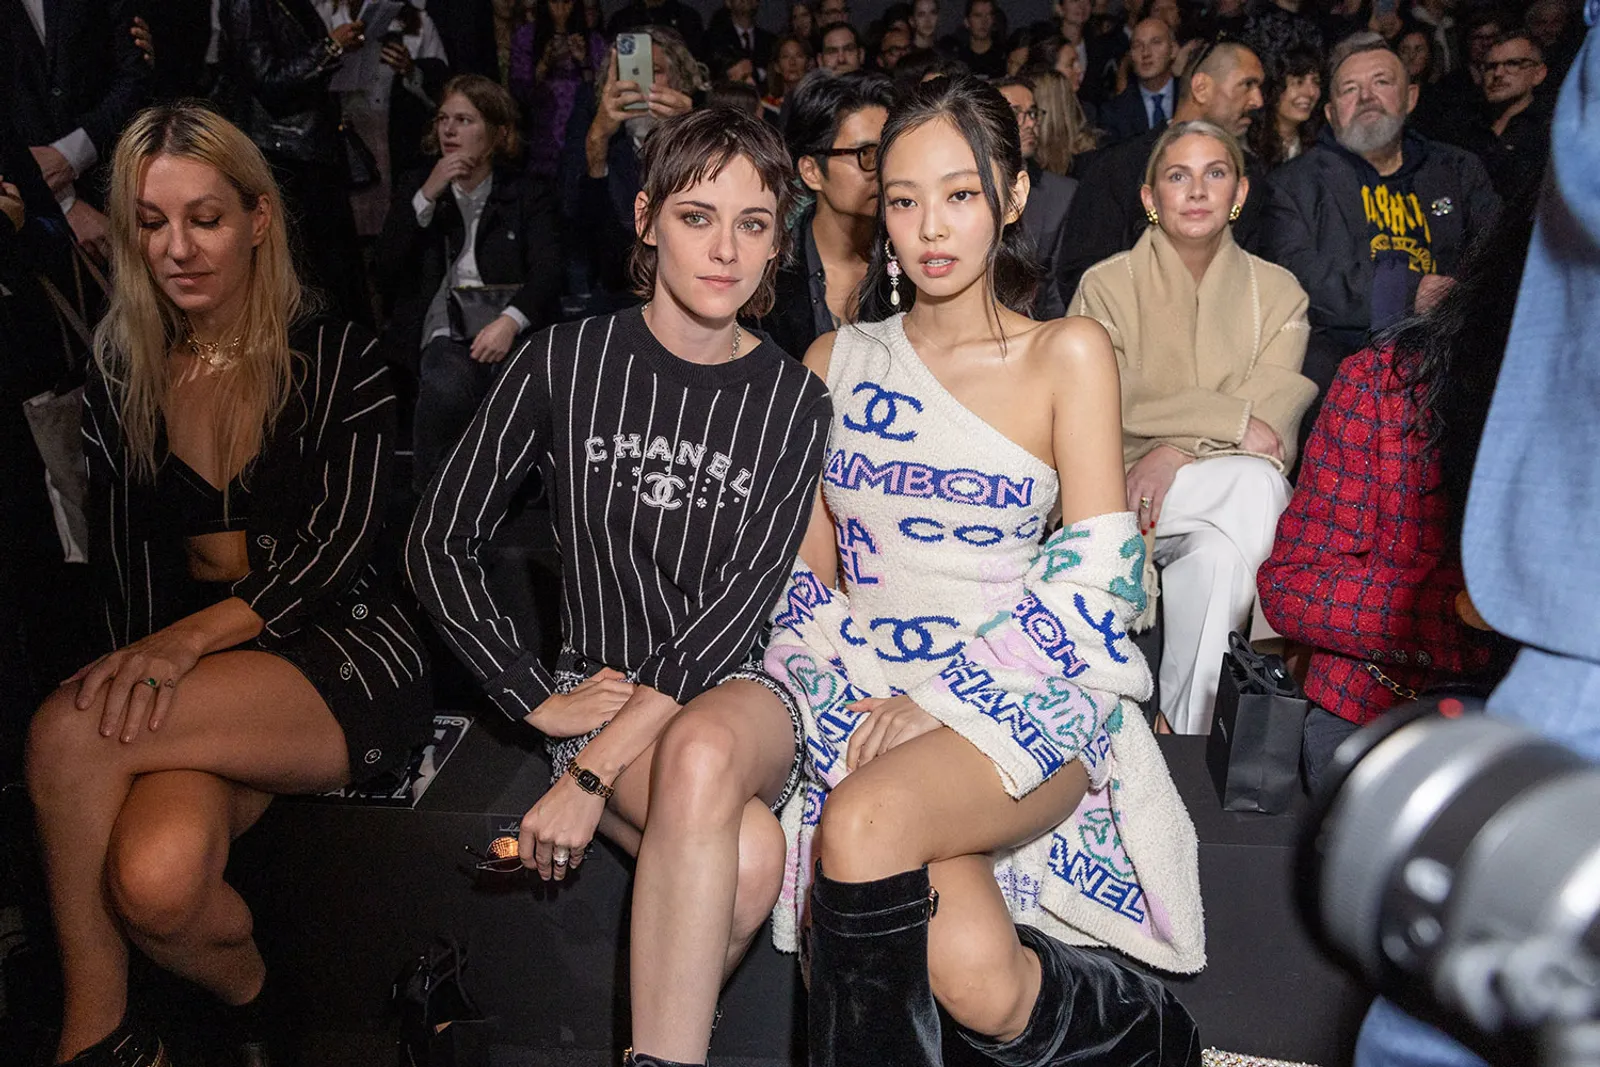 Jennie Blackpink, Lily-Rose Depp & Other Stars At Chanel's S/S '22 Show